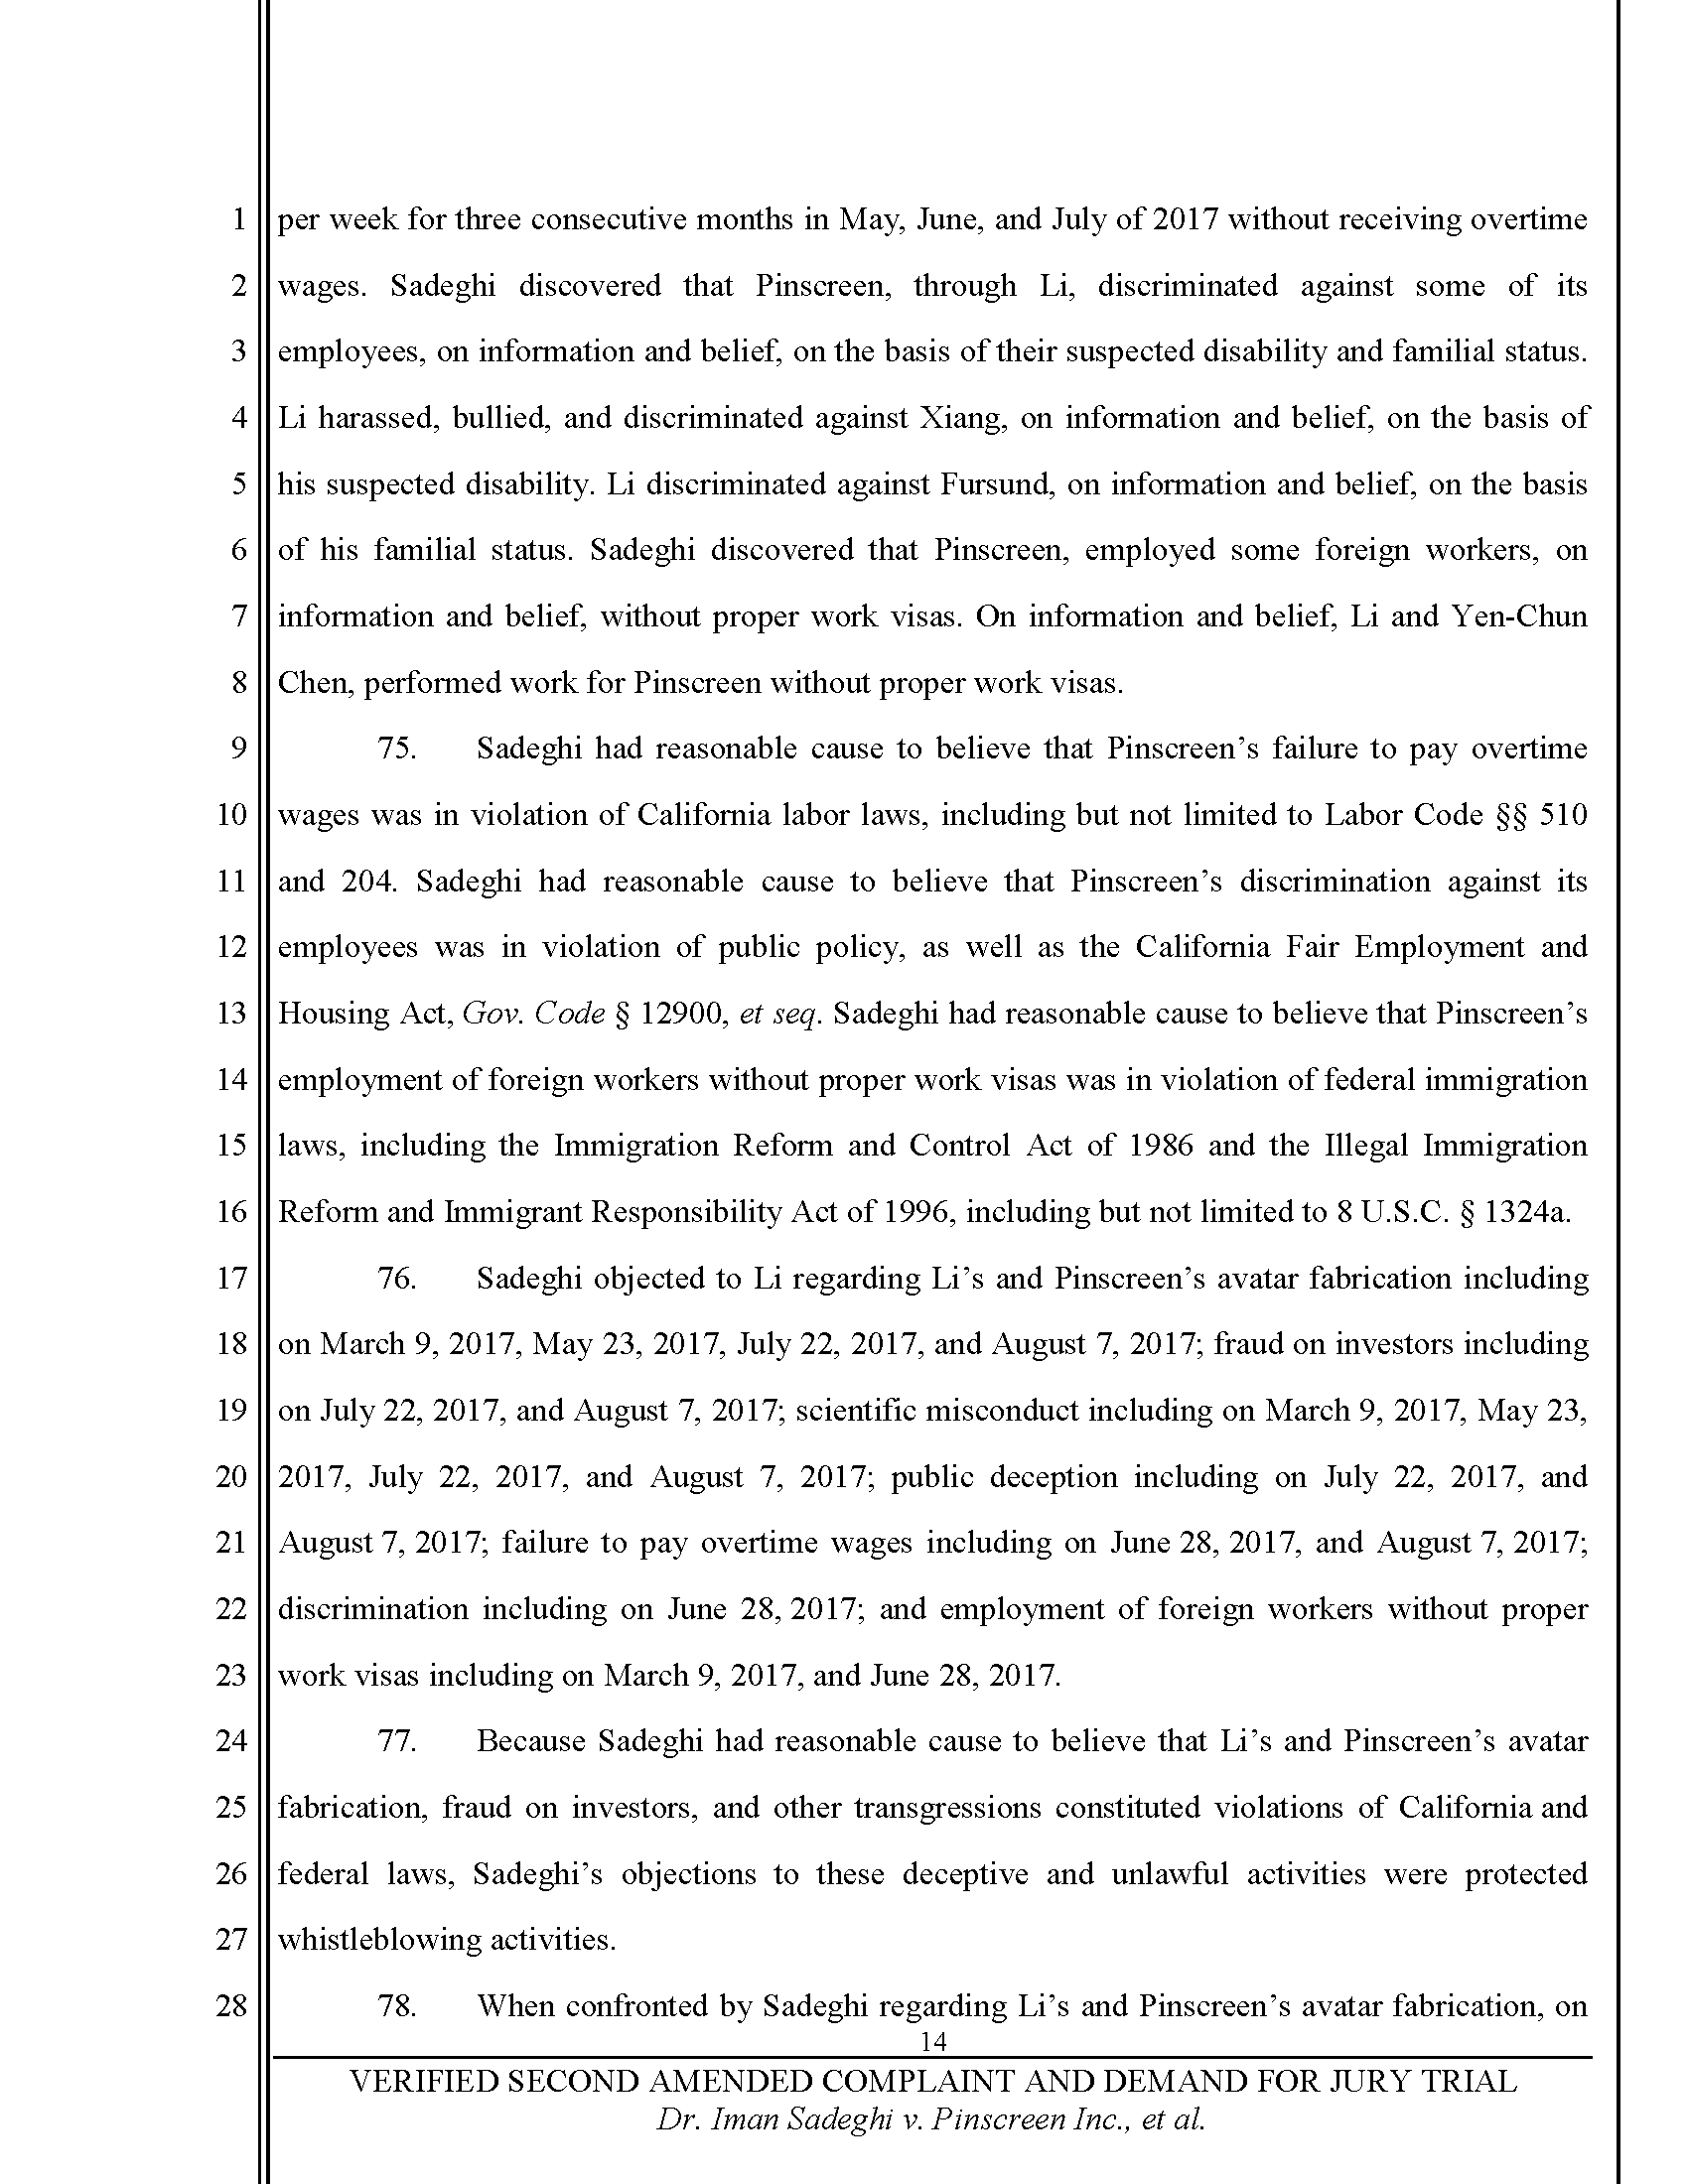 Second Amended Complaint (SAC) Page 15